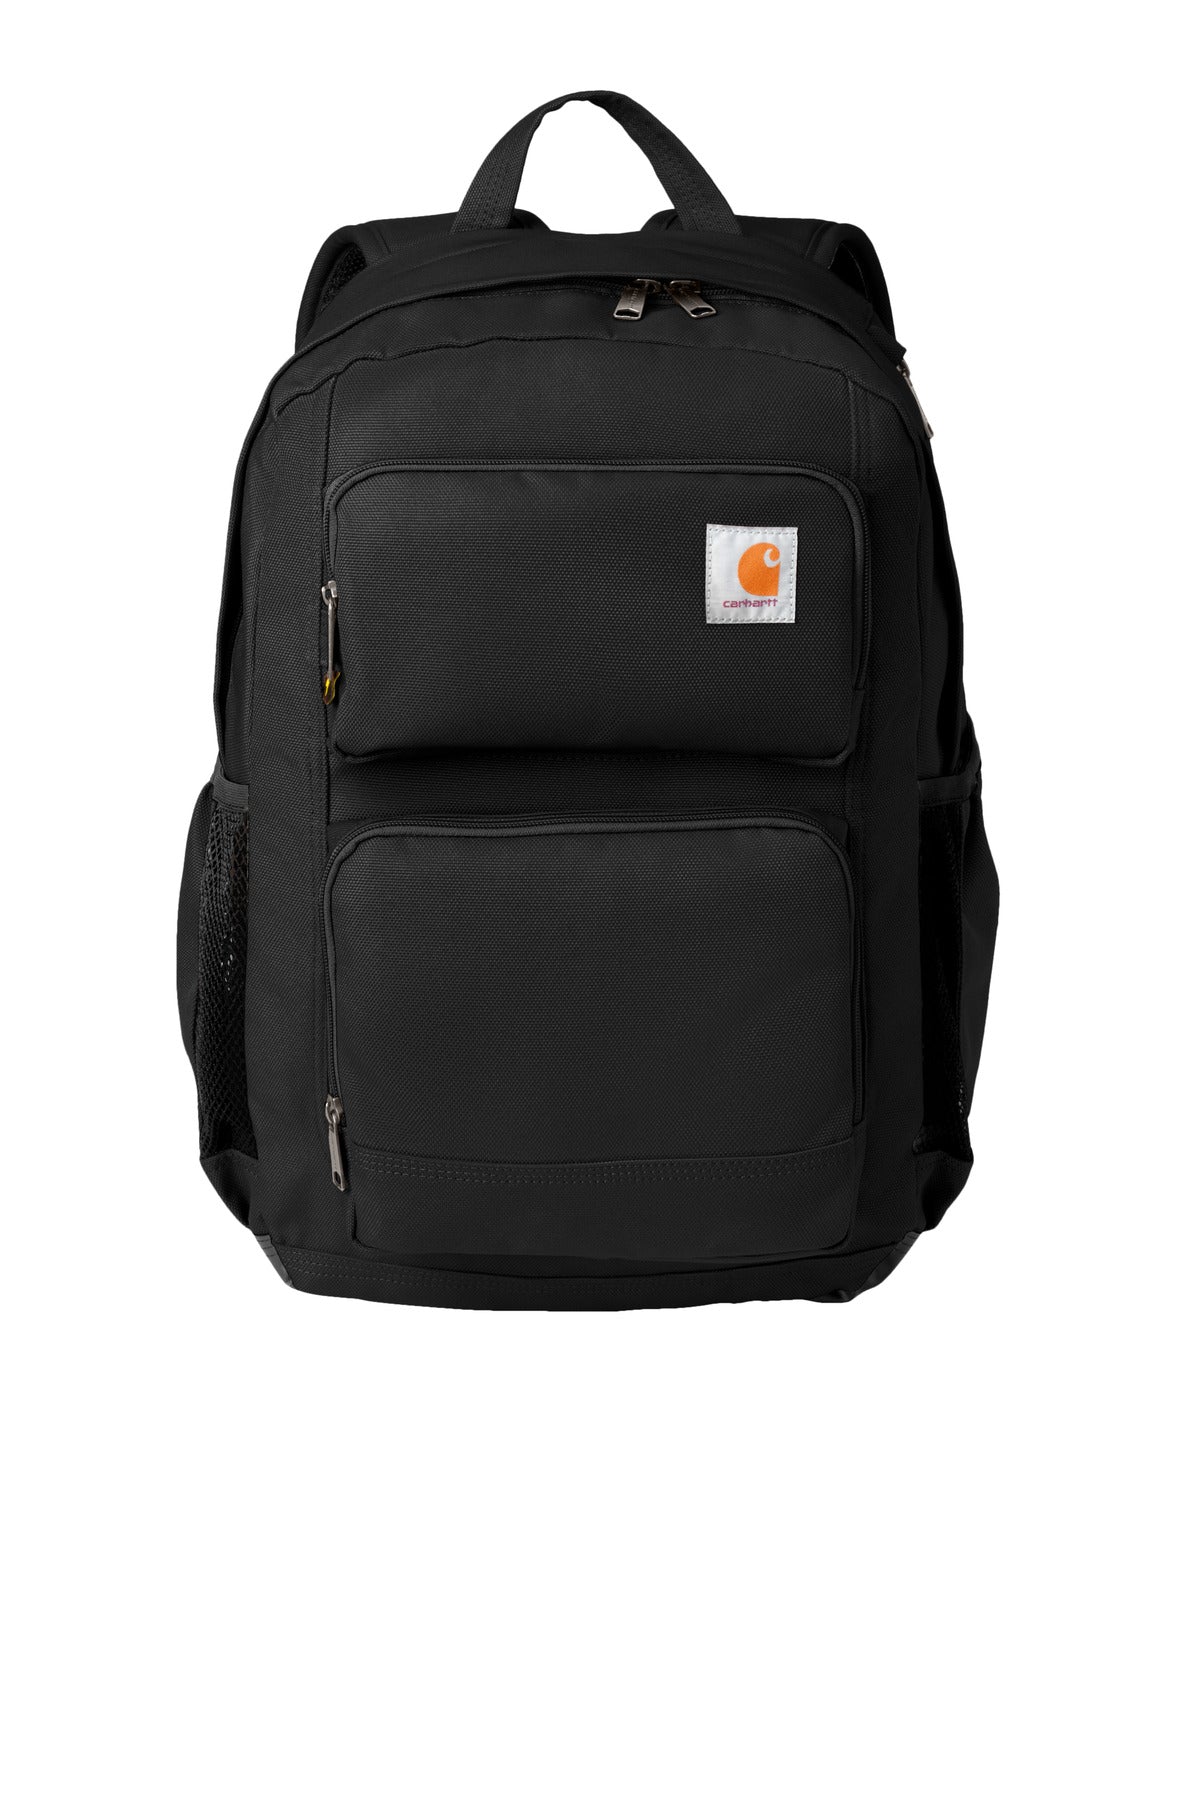 Carhartt® 28L Foundry Series Dual-Compartment Backpack CTB0000486